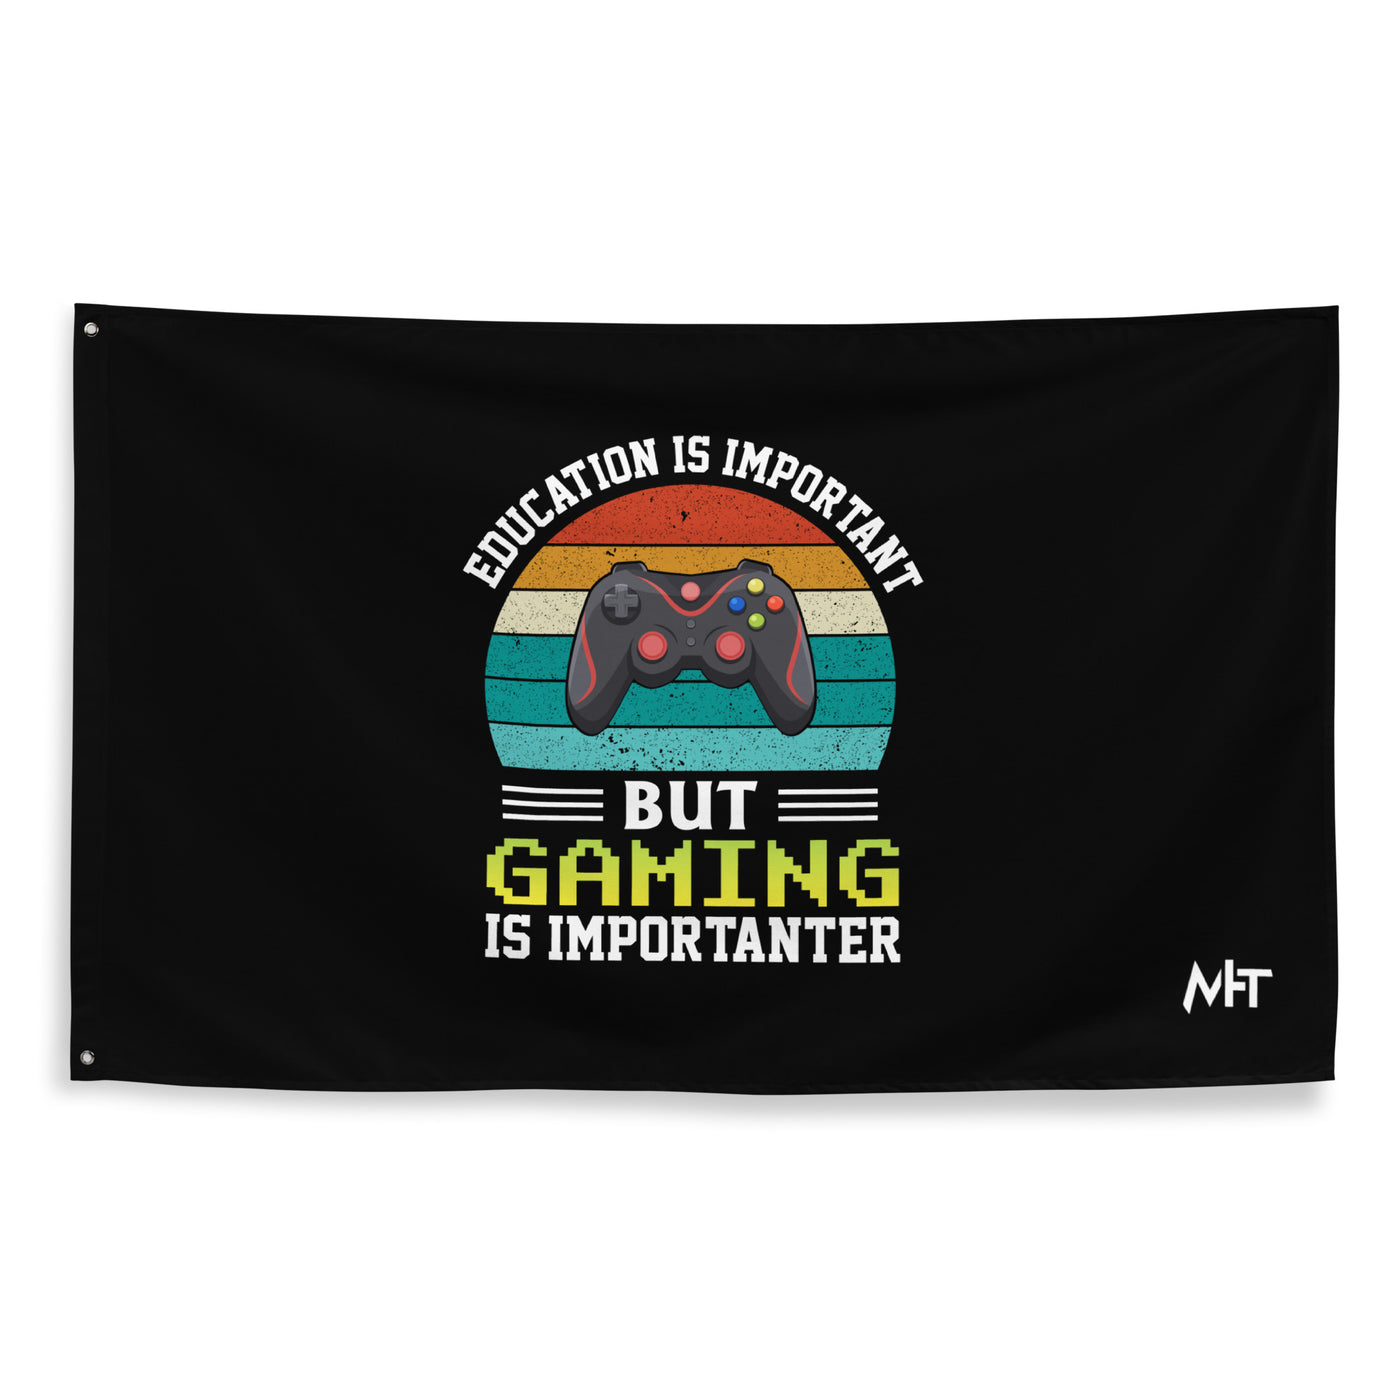 Education is Important, but Gaming is importanter - Flag